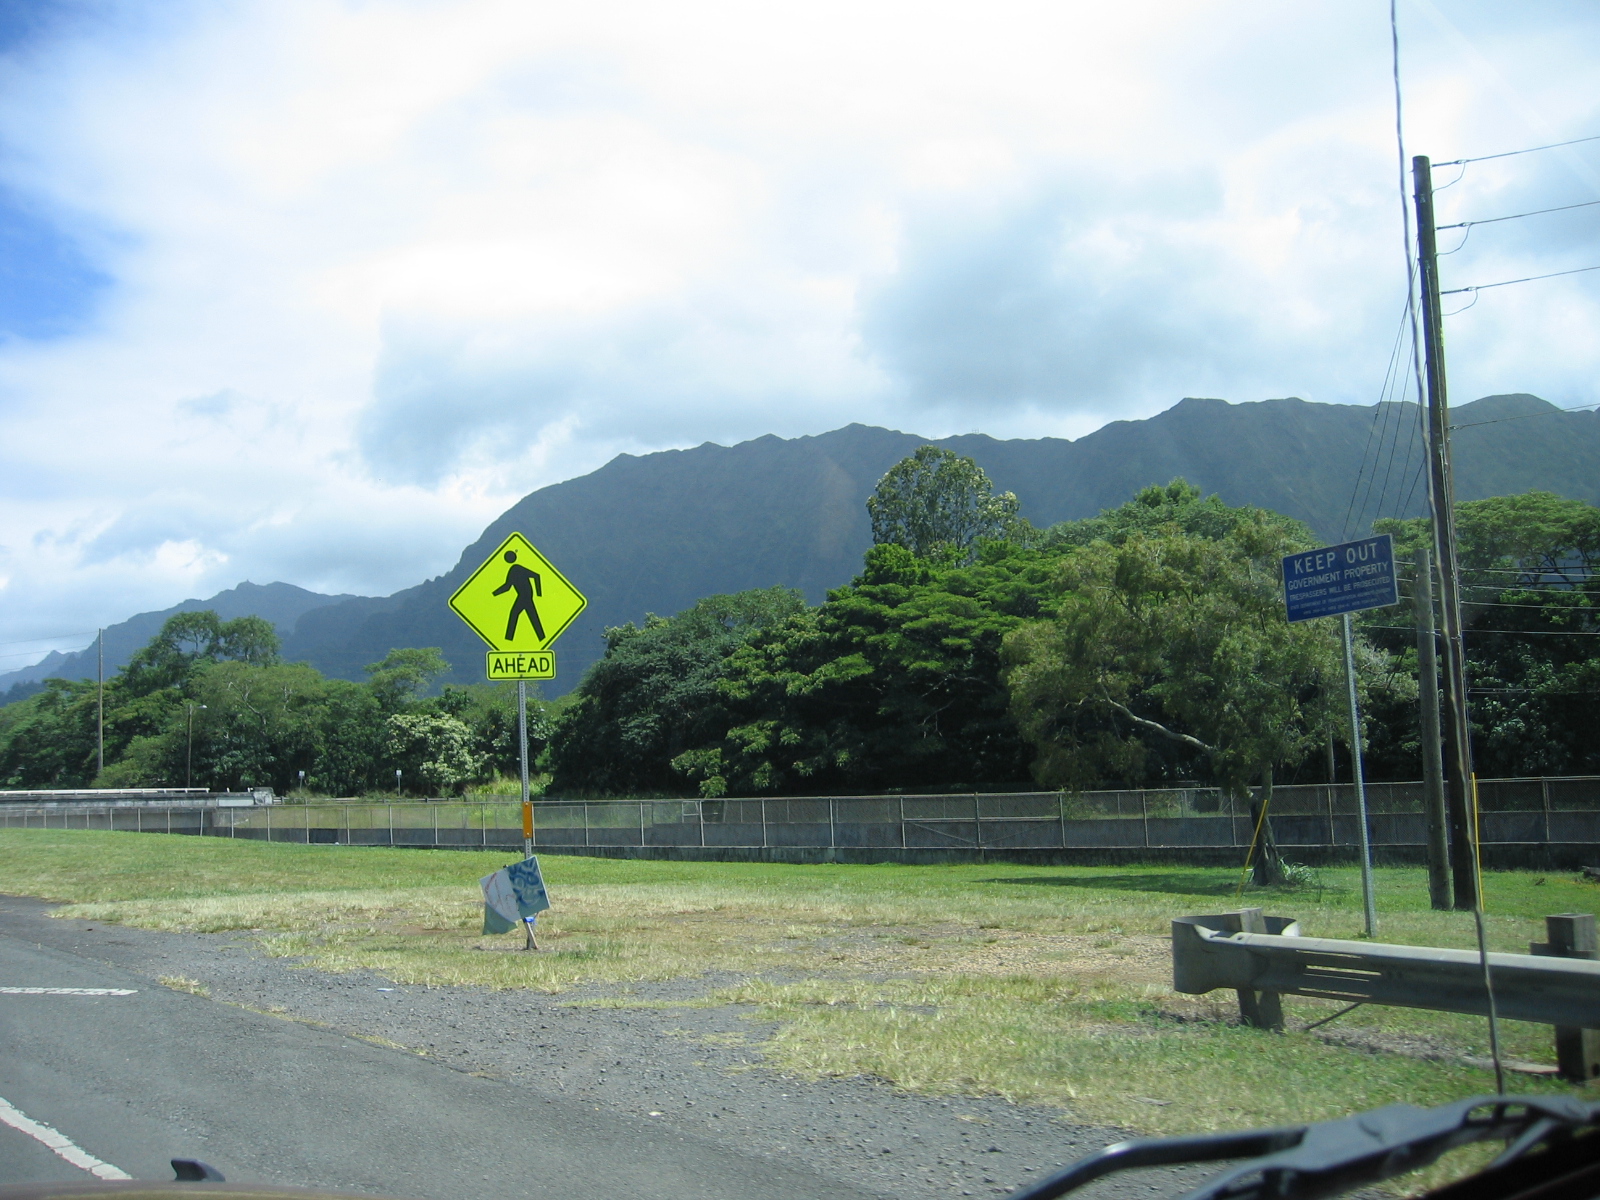 on the way to Pali lookout